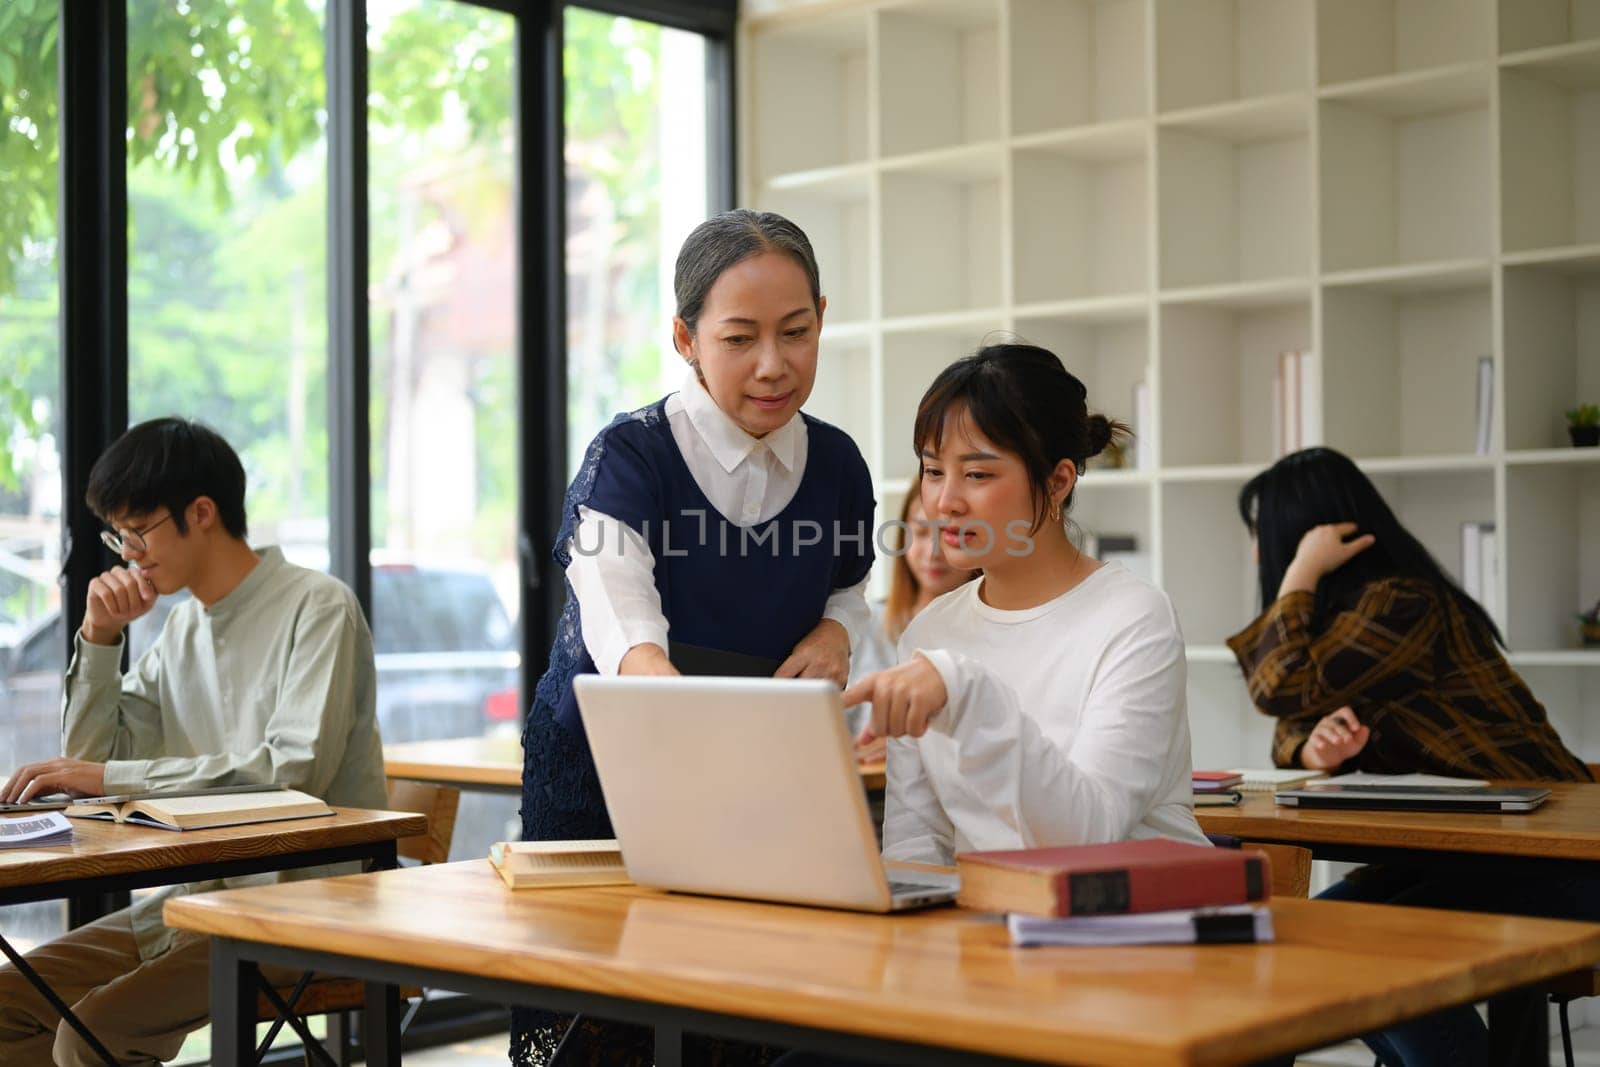 Mature lecturer assisting college student with laptop in classroom. Education concept.